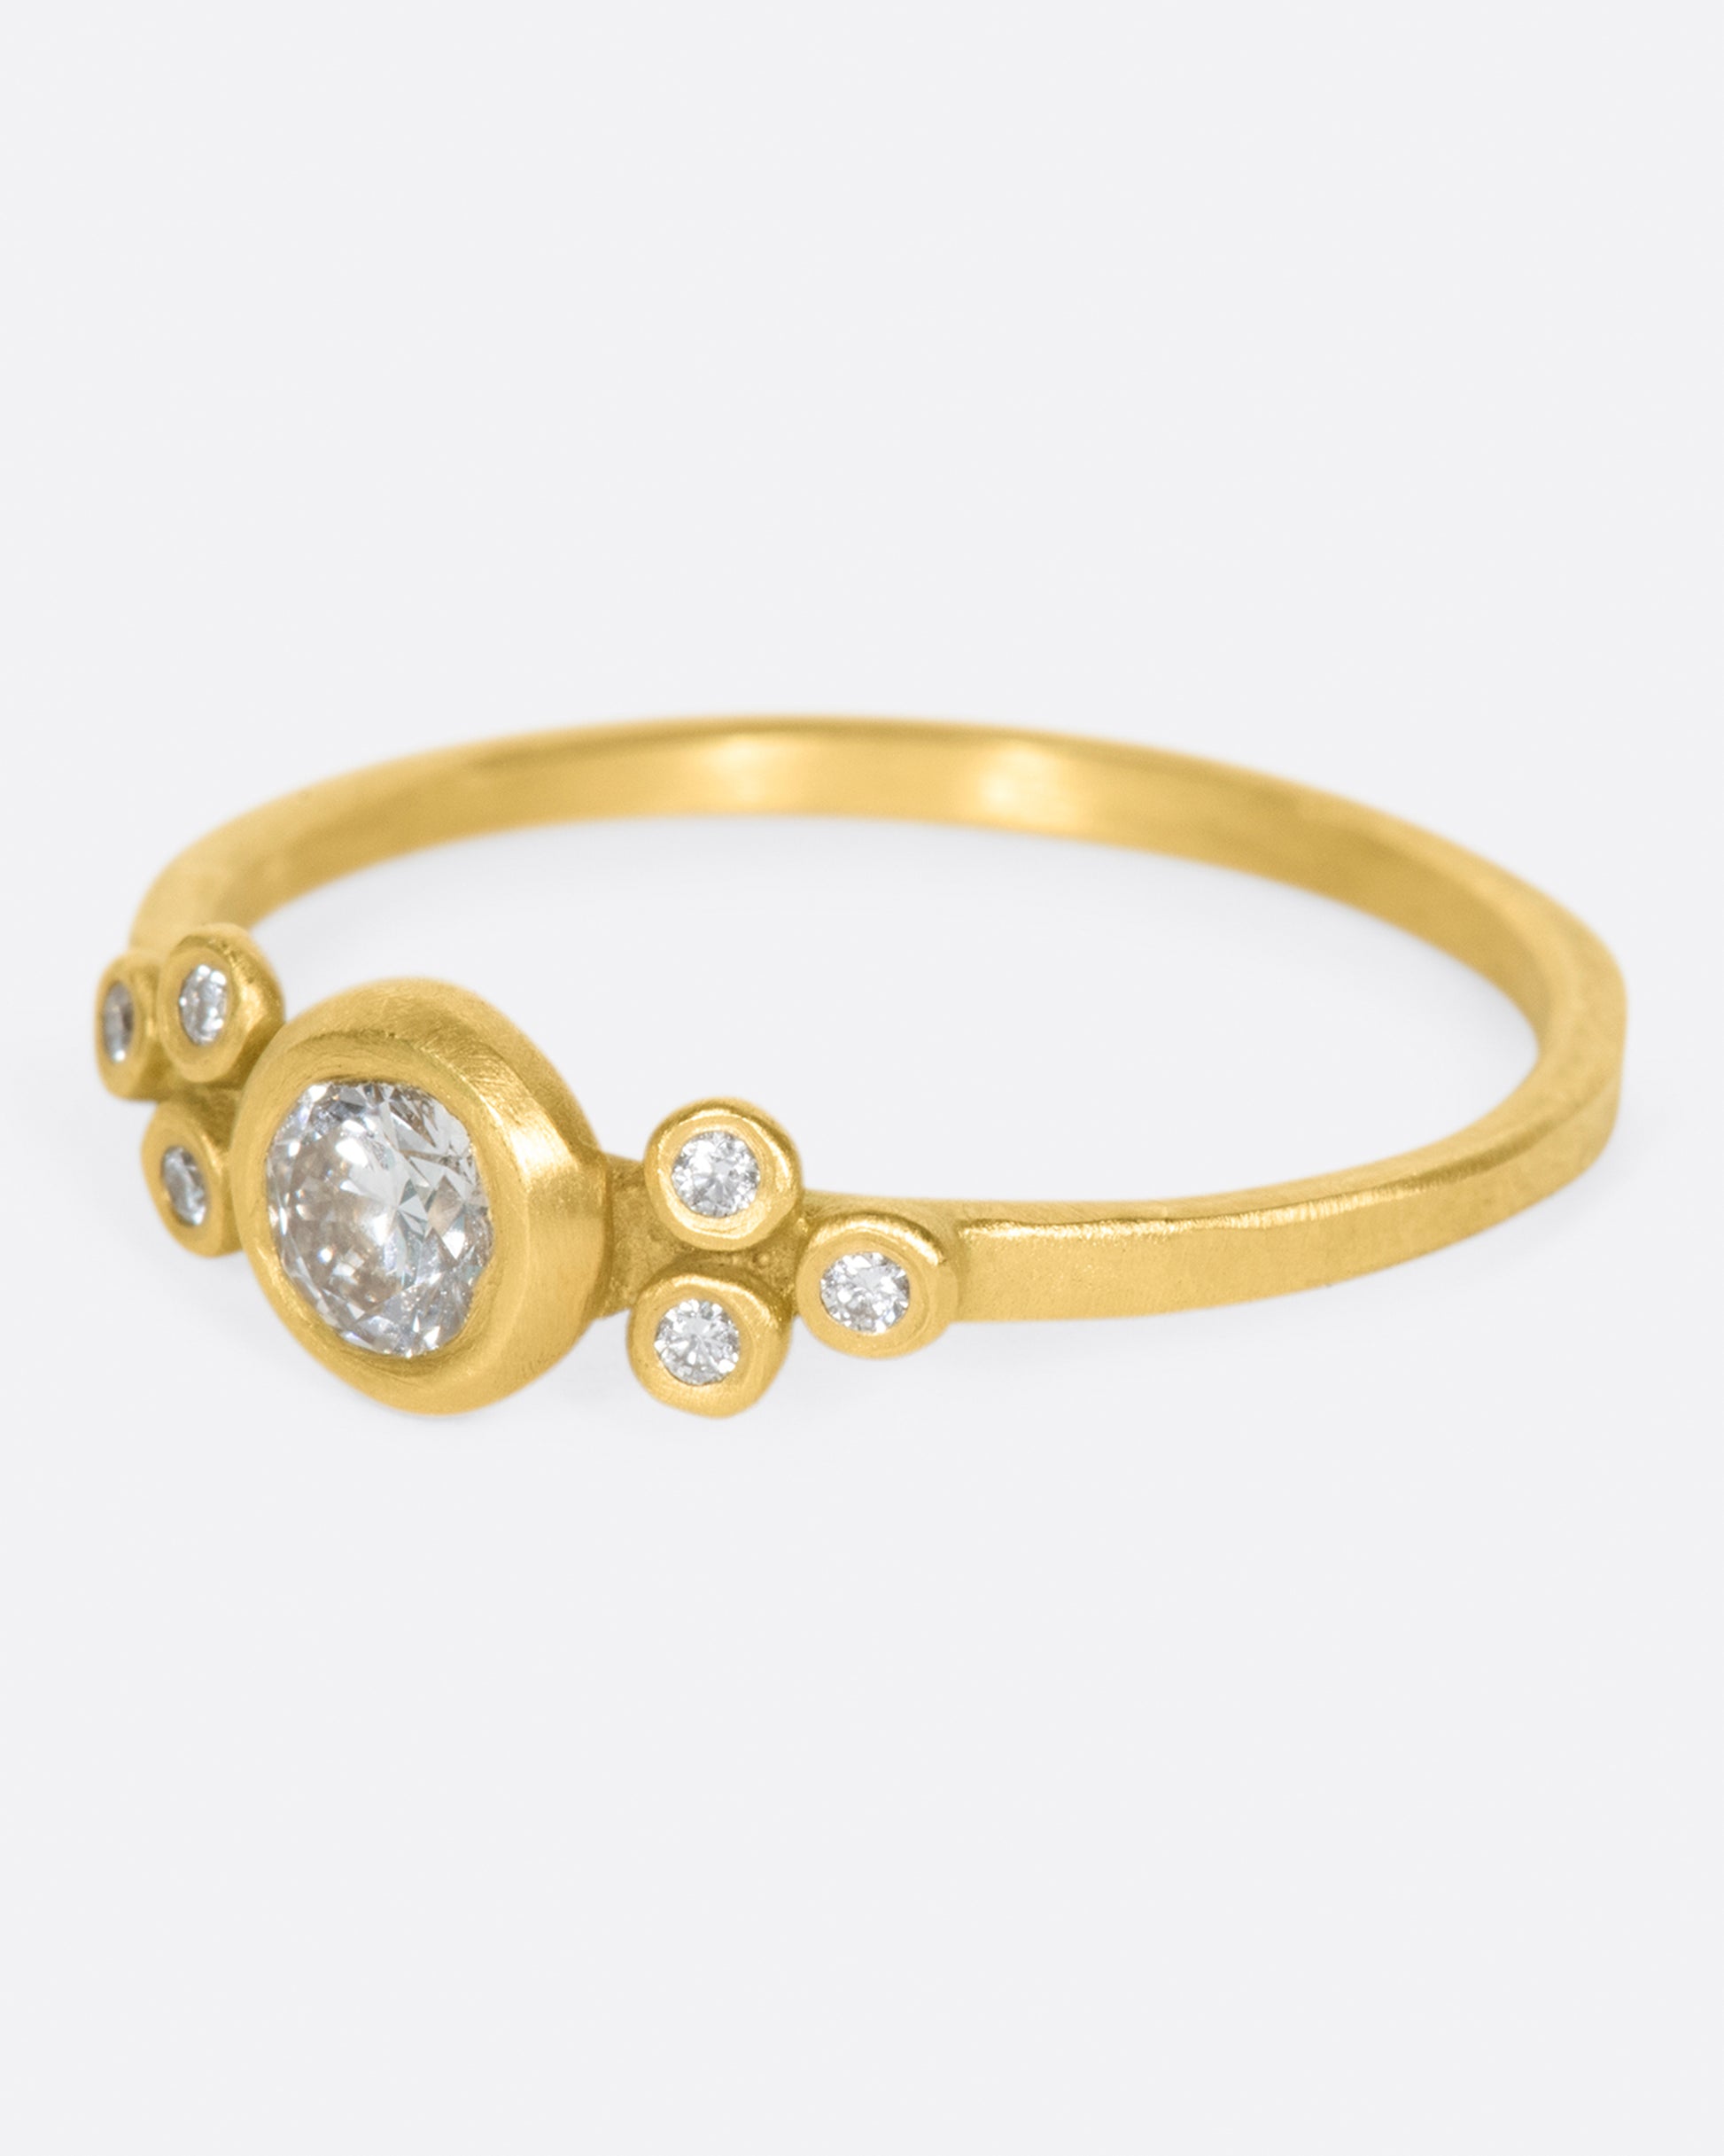 A hammered gold band with a round bezel set diamond at its center, flanked by three smaller round diamonds on either side.